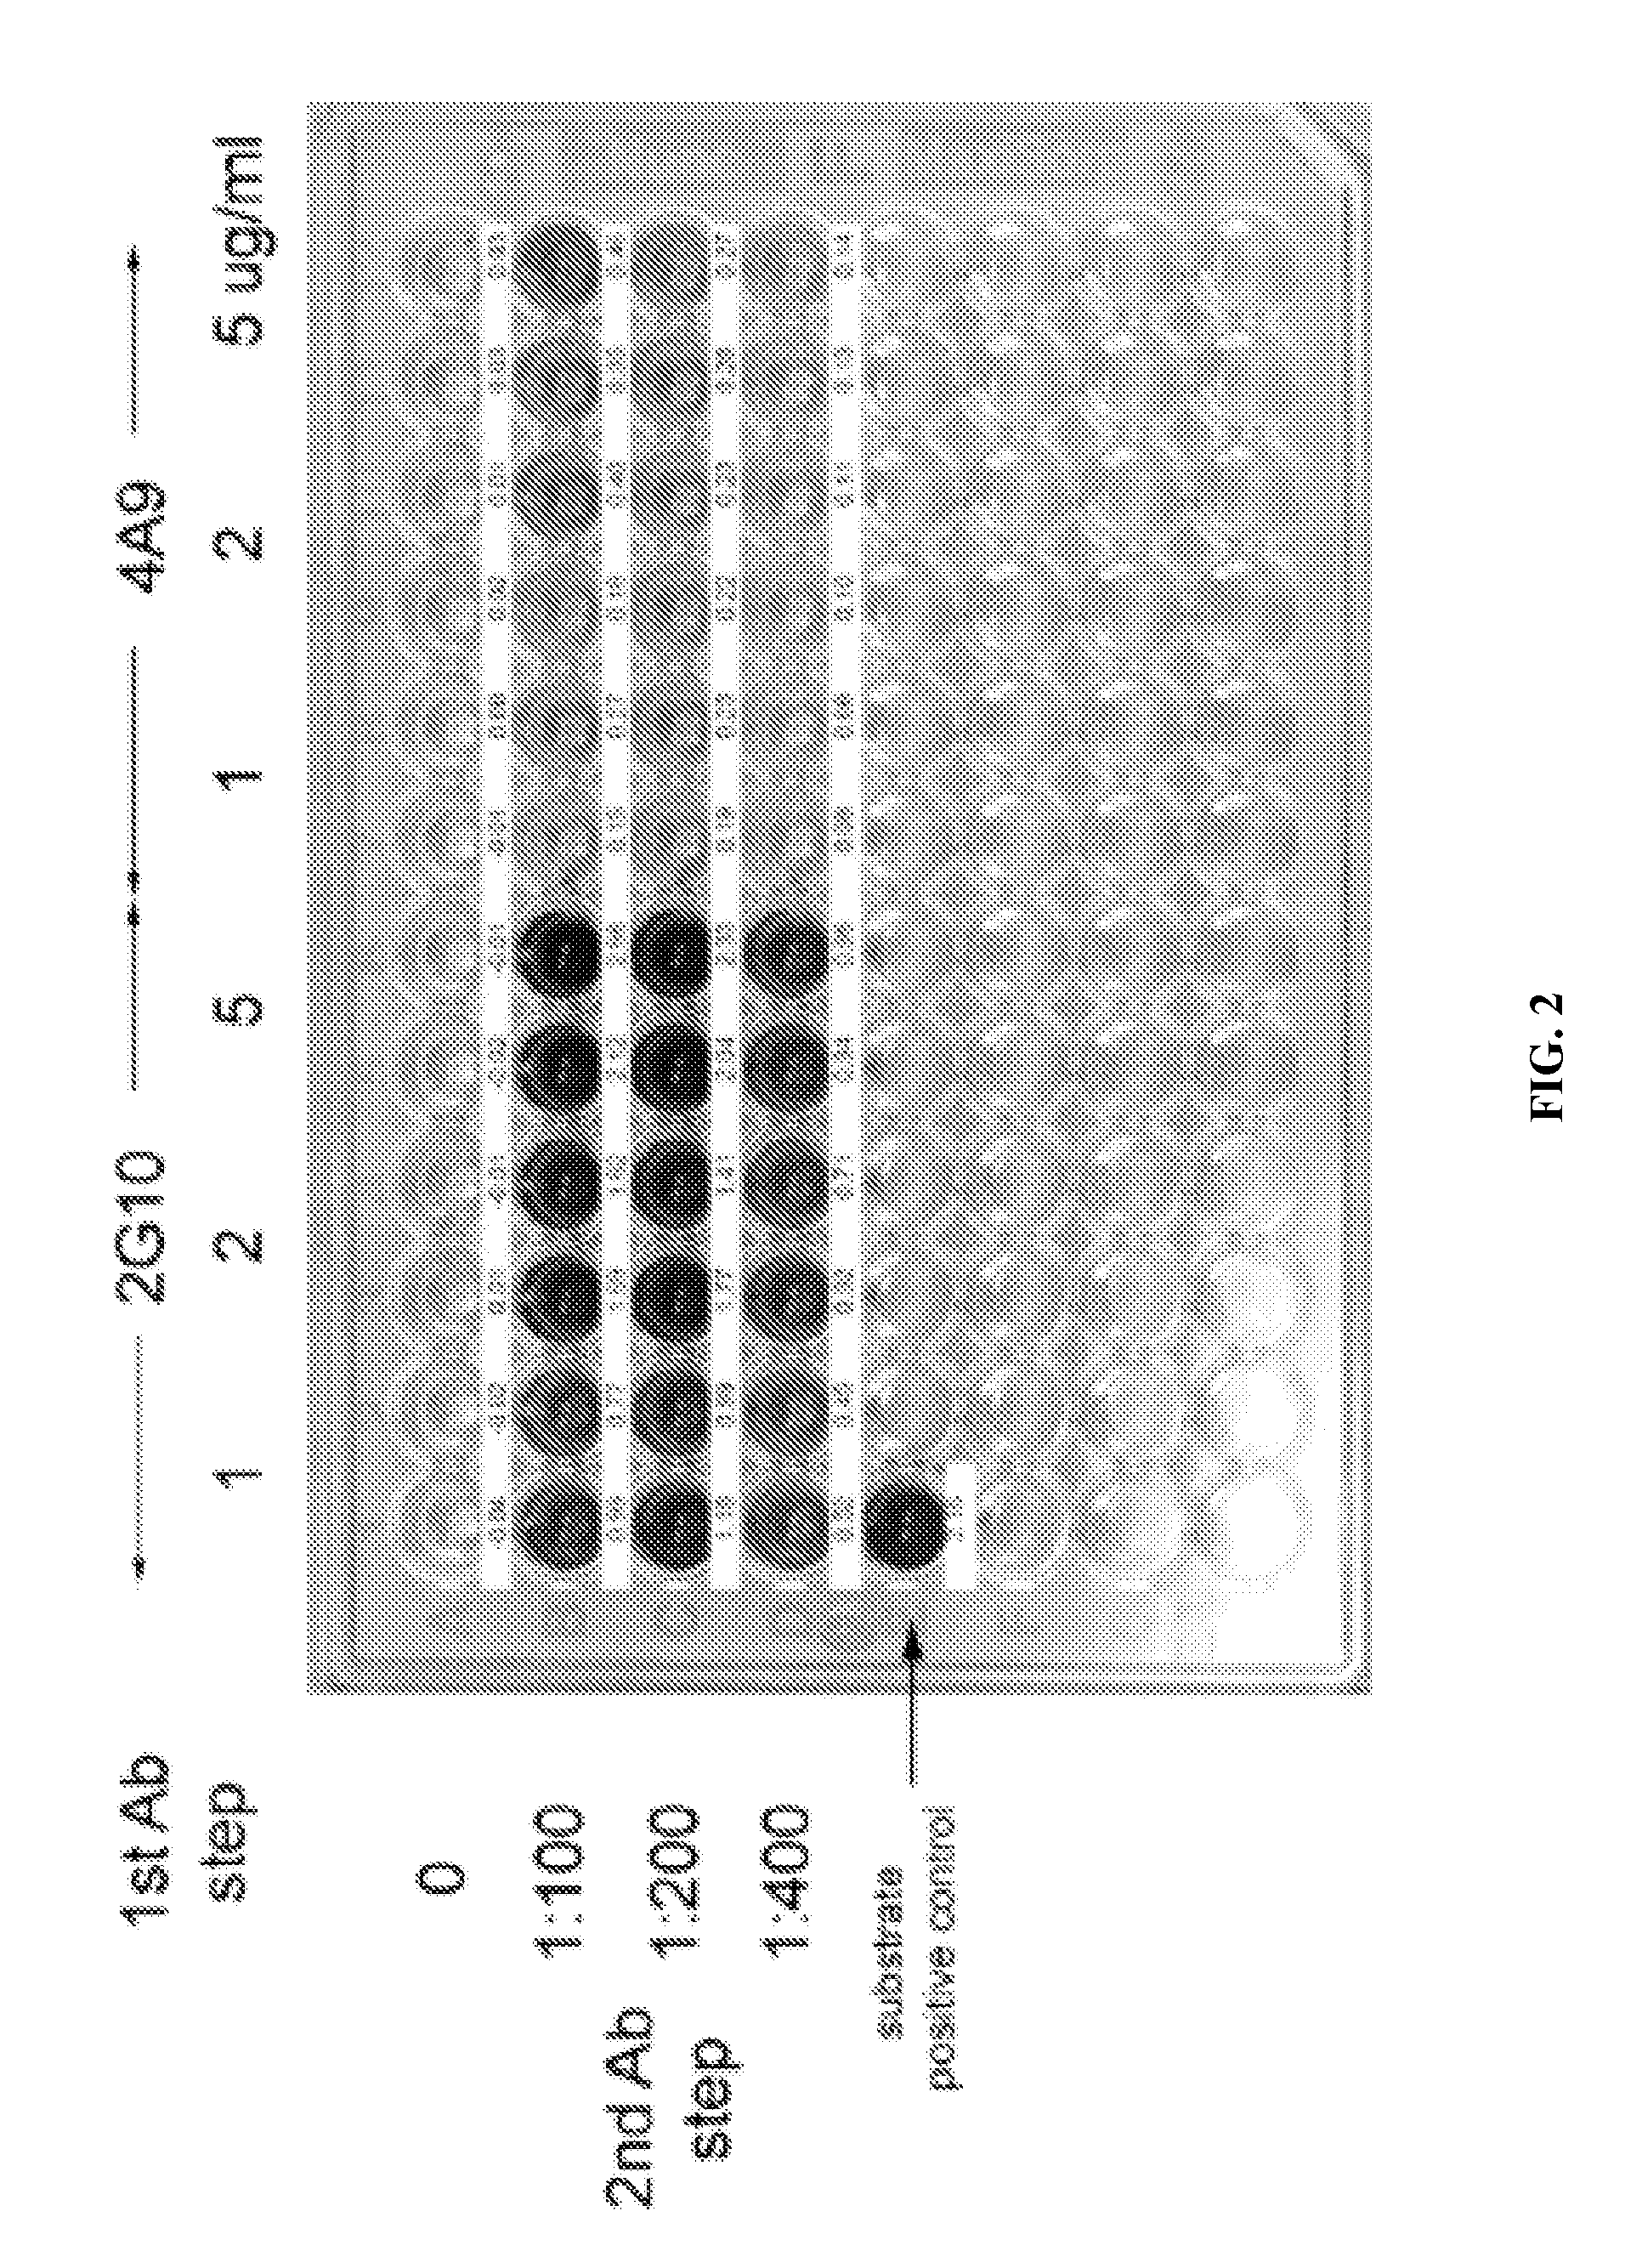 Compositions and methods for detecting cancers in a subject